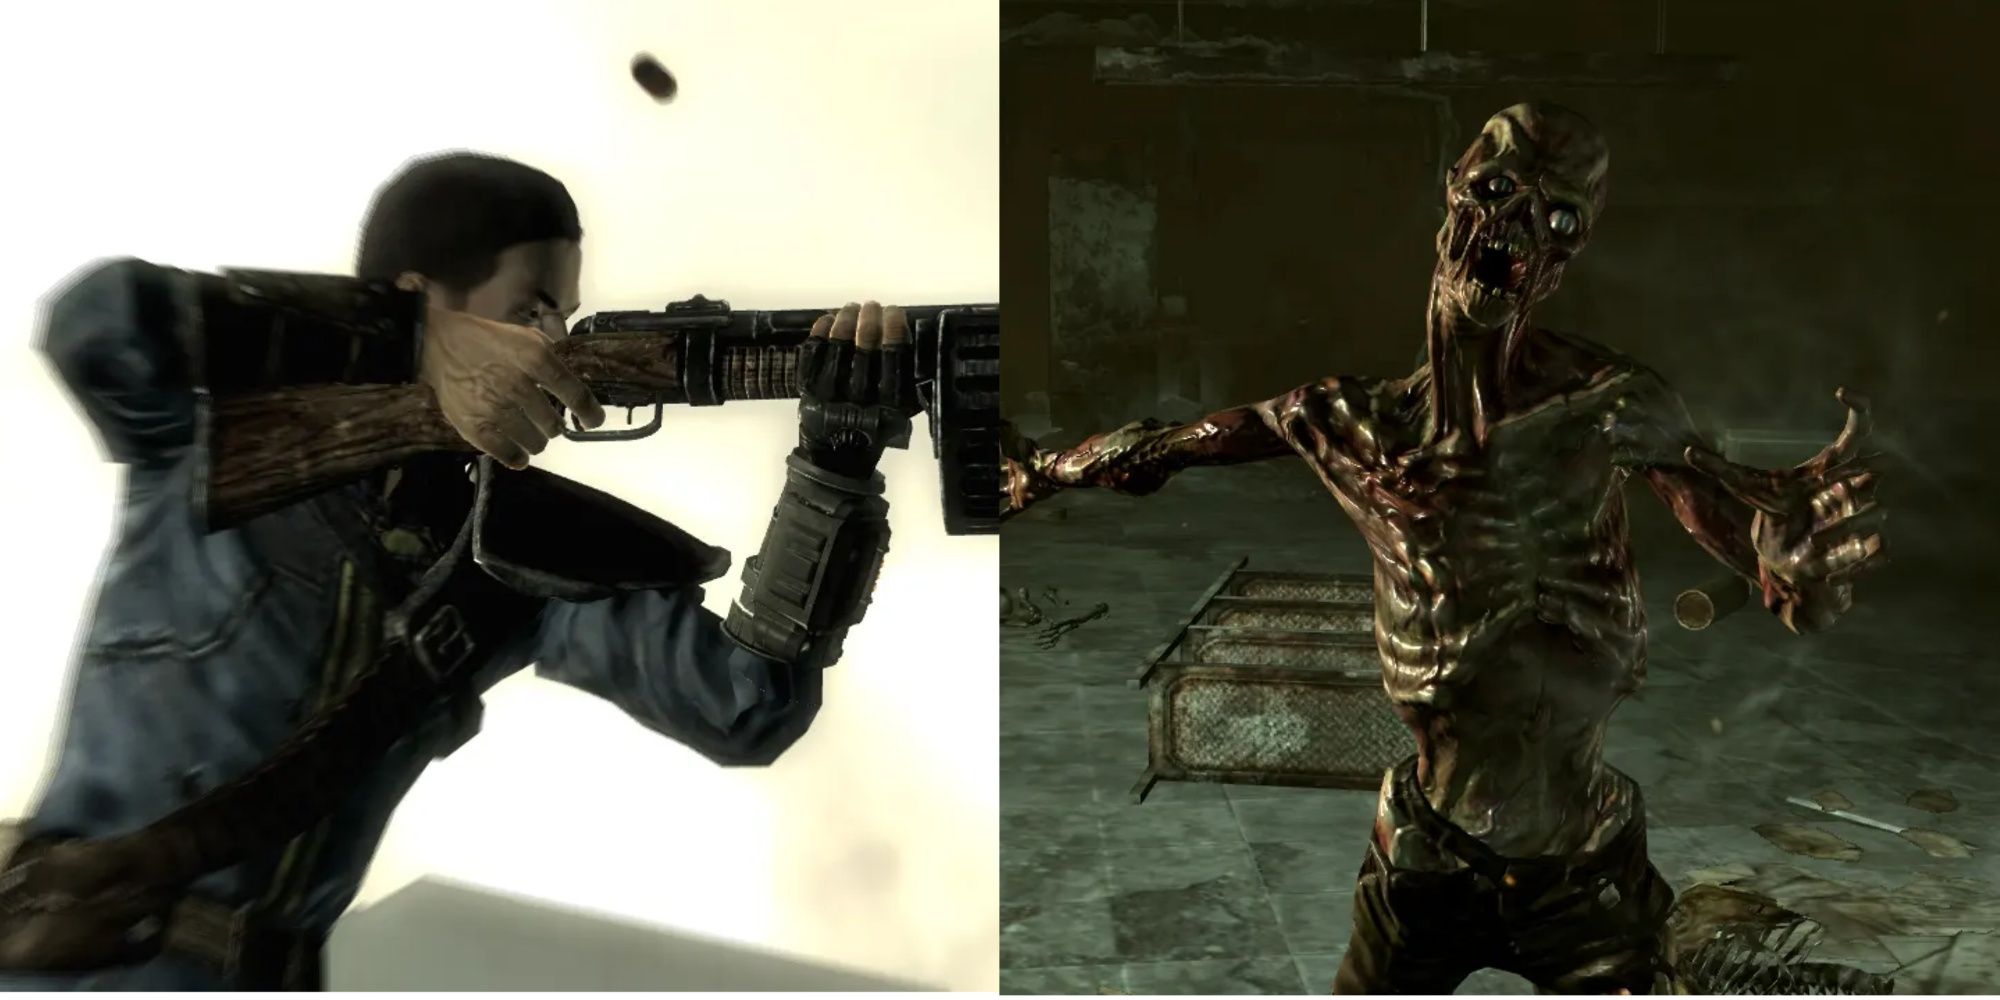 Character holding a shotgun and an enemy 